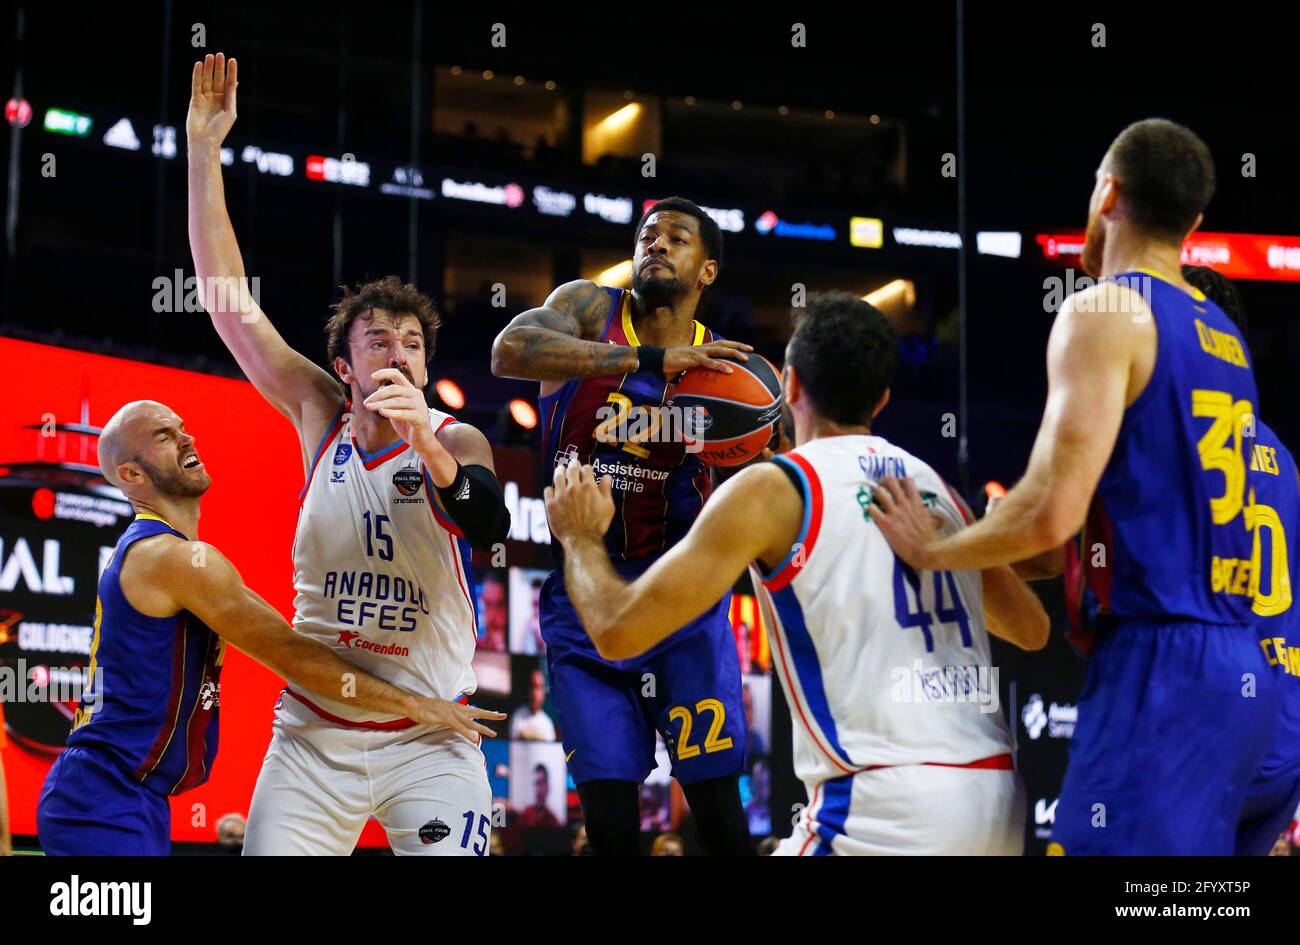 Basketball - Euroleague Final - FC Barcelona v Anadolu Efes Istanbul -  Lanxess Arena, Cologne, Germany - May 30, 2021 FC Barcelona's Cory Higgins  in action REUTERS/Thilo Schmuelgen Stock Photo - Alamy